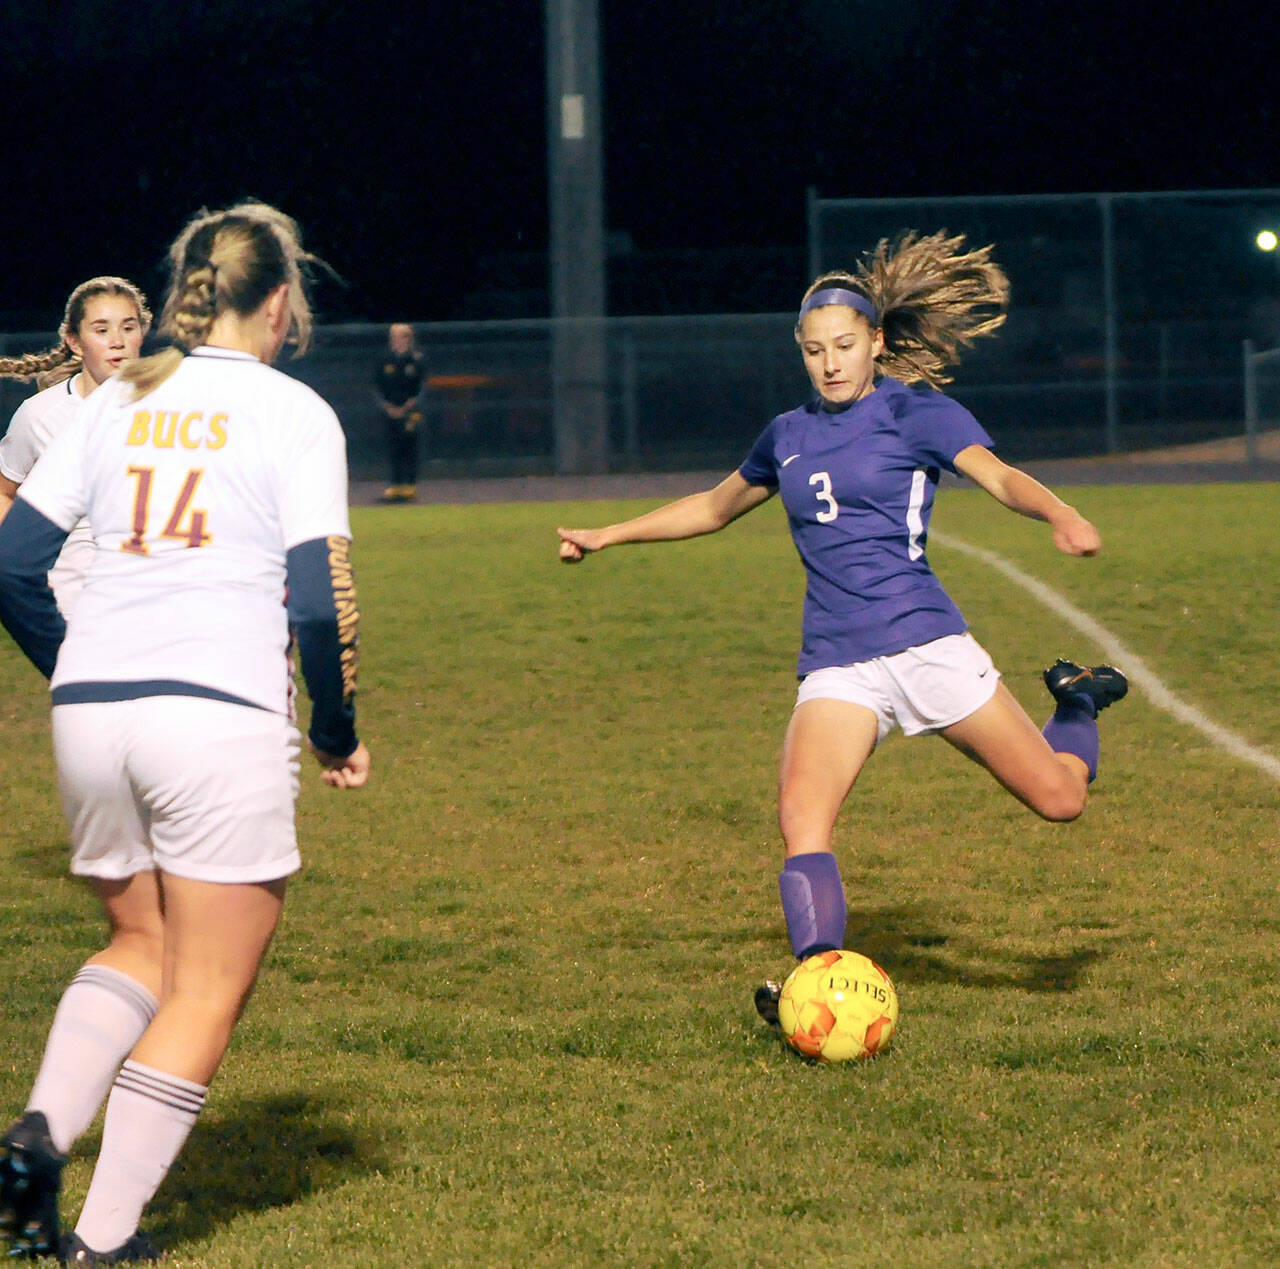 Sequim Gazette file photo by Michael Dashiell / Sequim’s Jennyfer Gomez, left, battles with a Clover Park midfielder in the Wolves’ 2-0 win in the West Central District tourney opener in 2022.
Sequim Gazette file photos by Michael Dashiell
Sequim’s Taryn Johnson, left, looks for an open teammate as the Wolves take on Kingston at home in a 2022 Olympic League match-up. Johnson set the program’s record for career goals as a junior last season. At right: Sequim’s Jennyfer Gomez, left, battles with a Clover Park midfielder in the Wolves’ 2-0 win in the West Central District tourney opener in 2022.